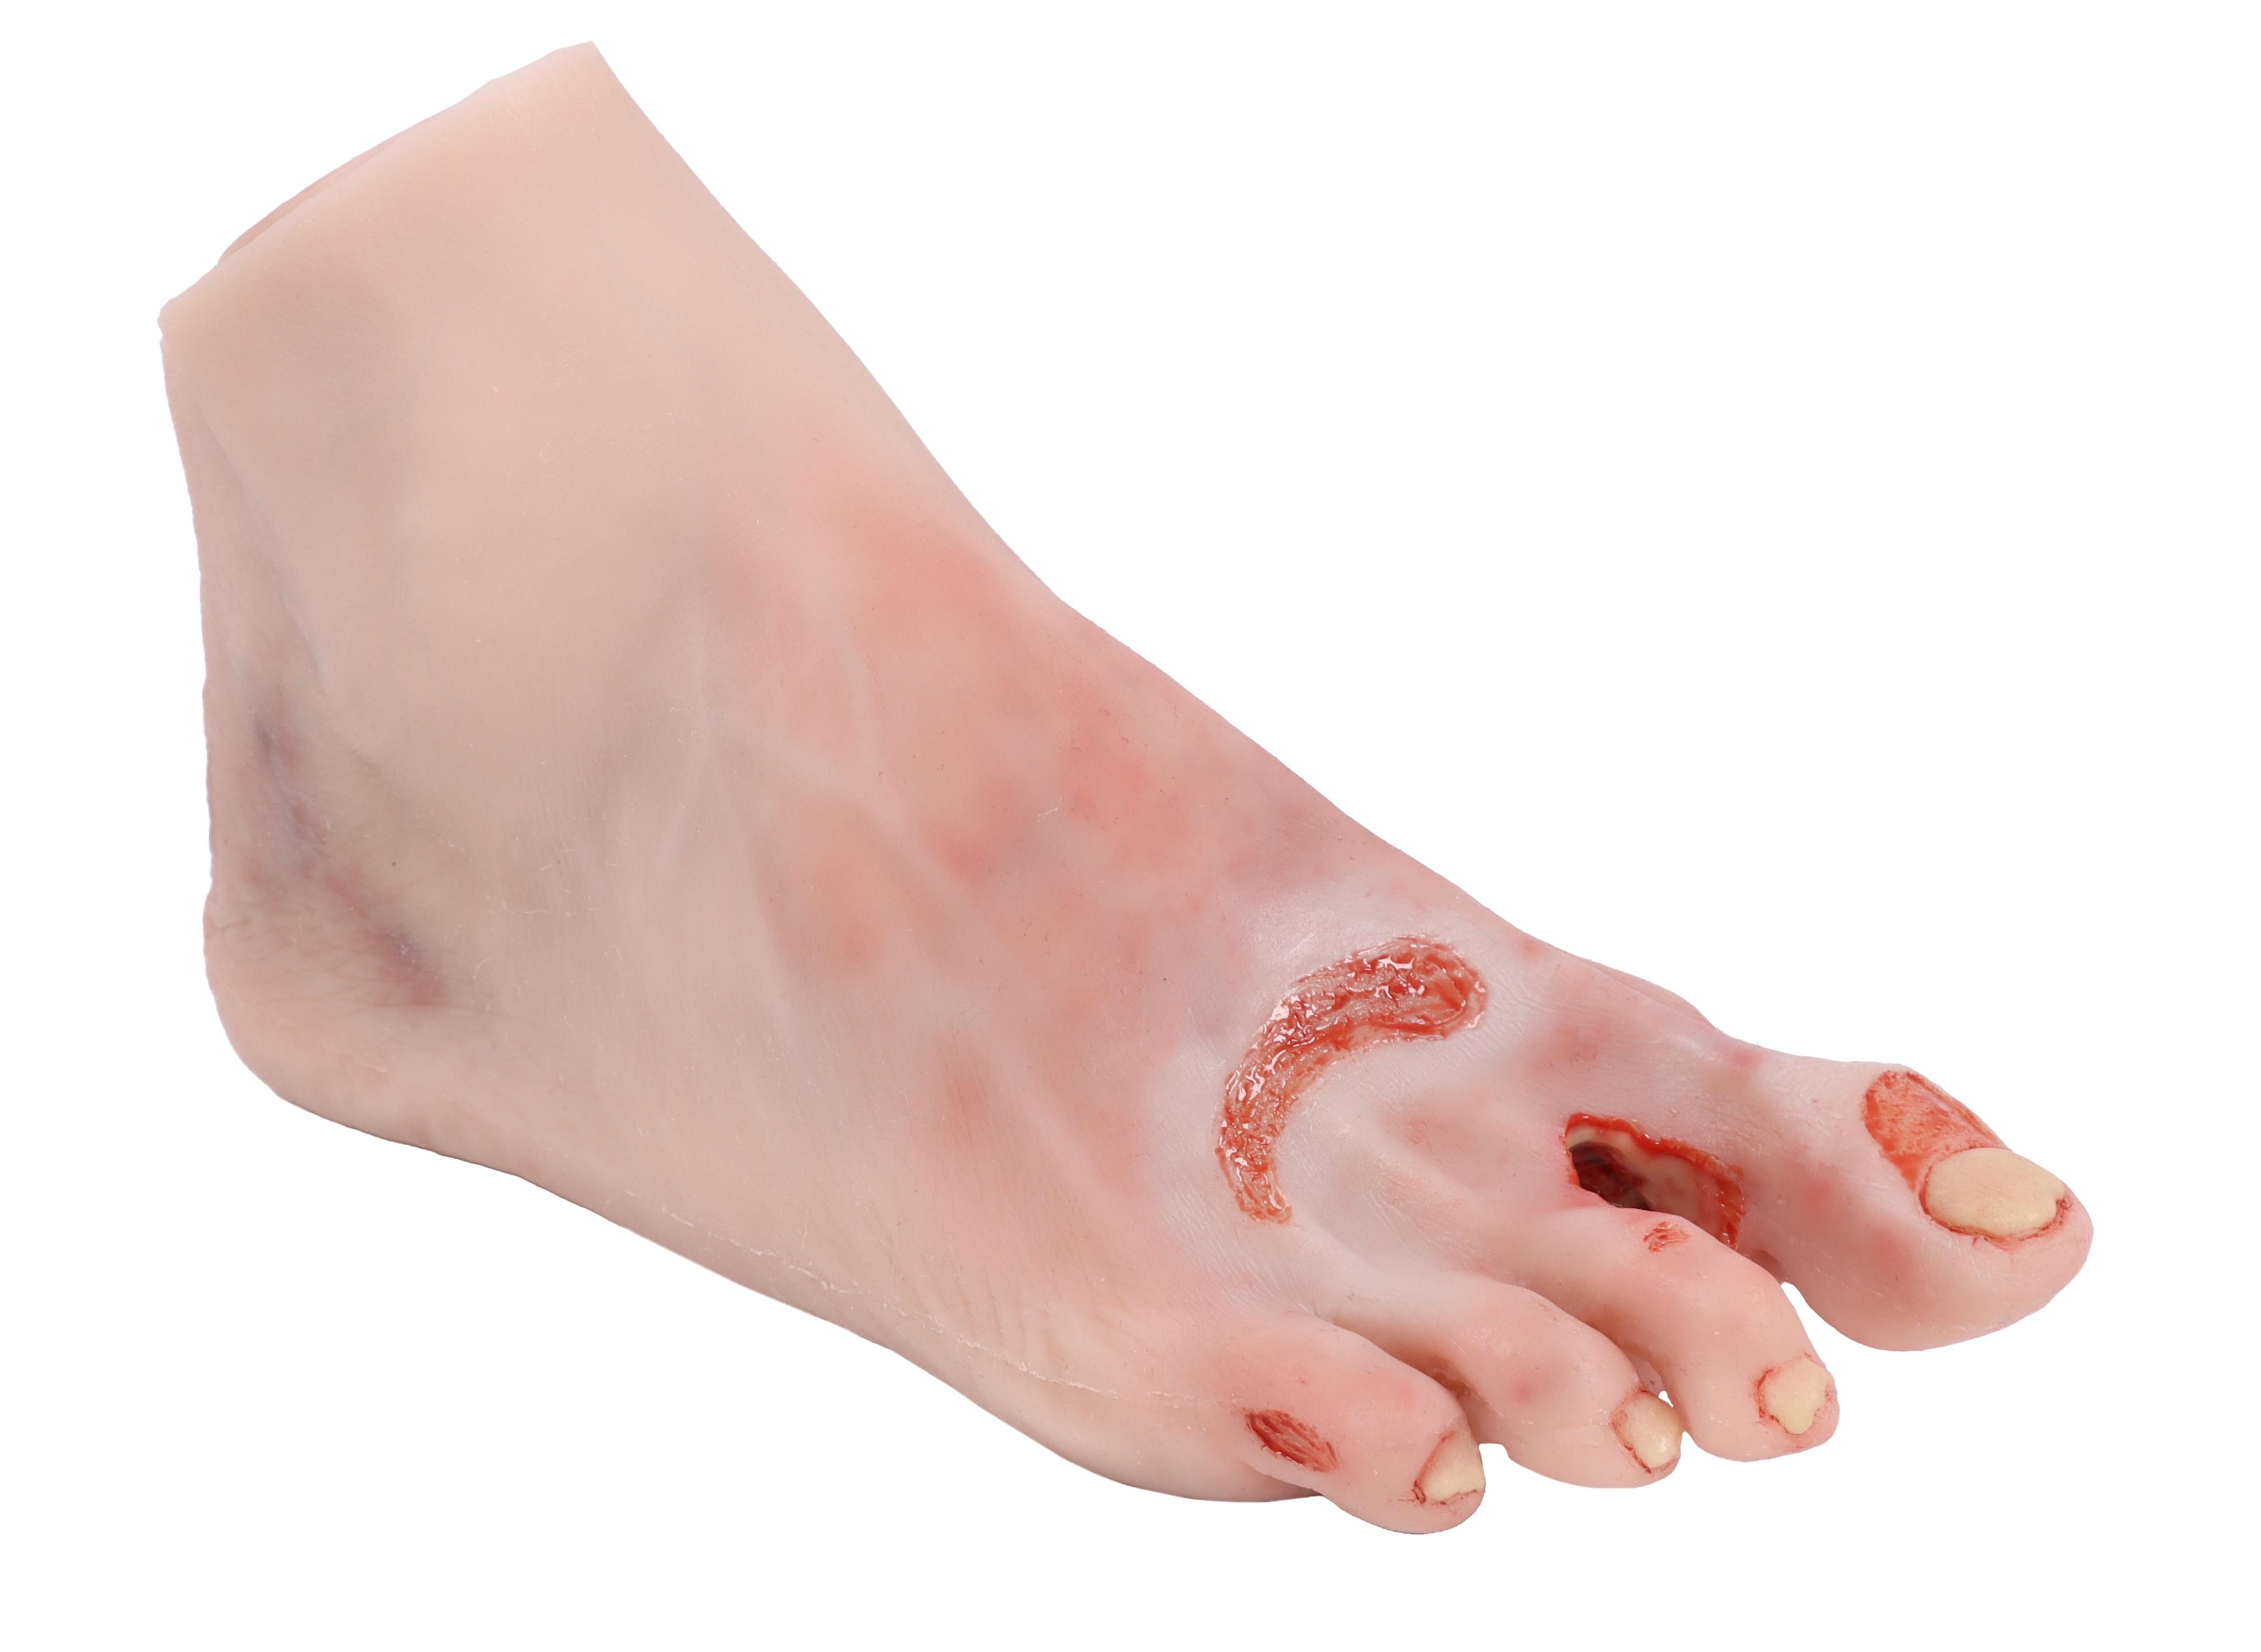 Wound-foot-with-diabetic-foot-syndrome-severe-stage